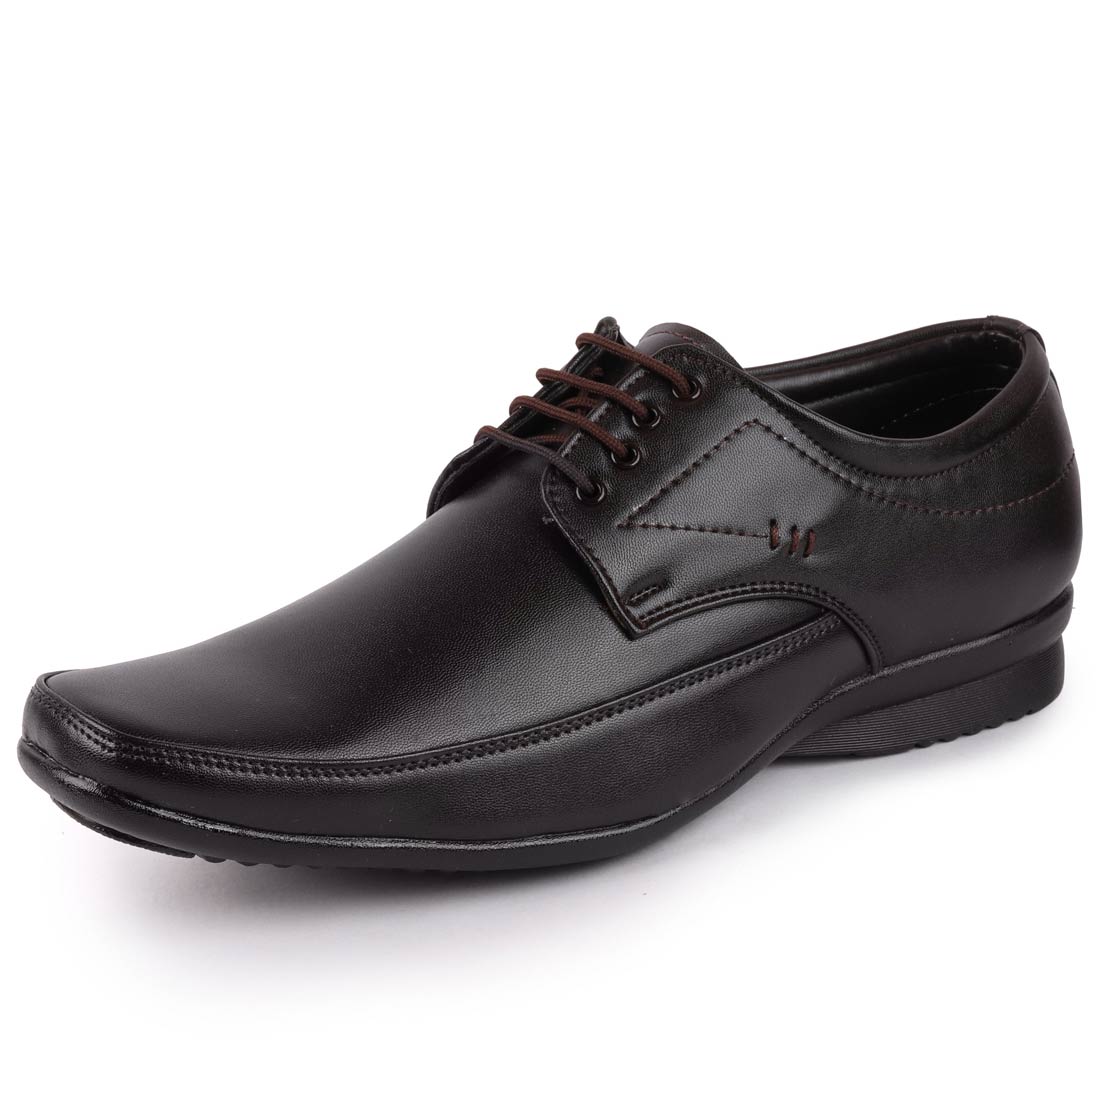 Buy Lakhani Men Brown Lace Up Formal Shoes Online @ ₹699 from ShopClues